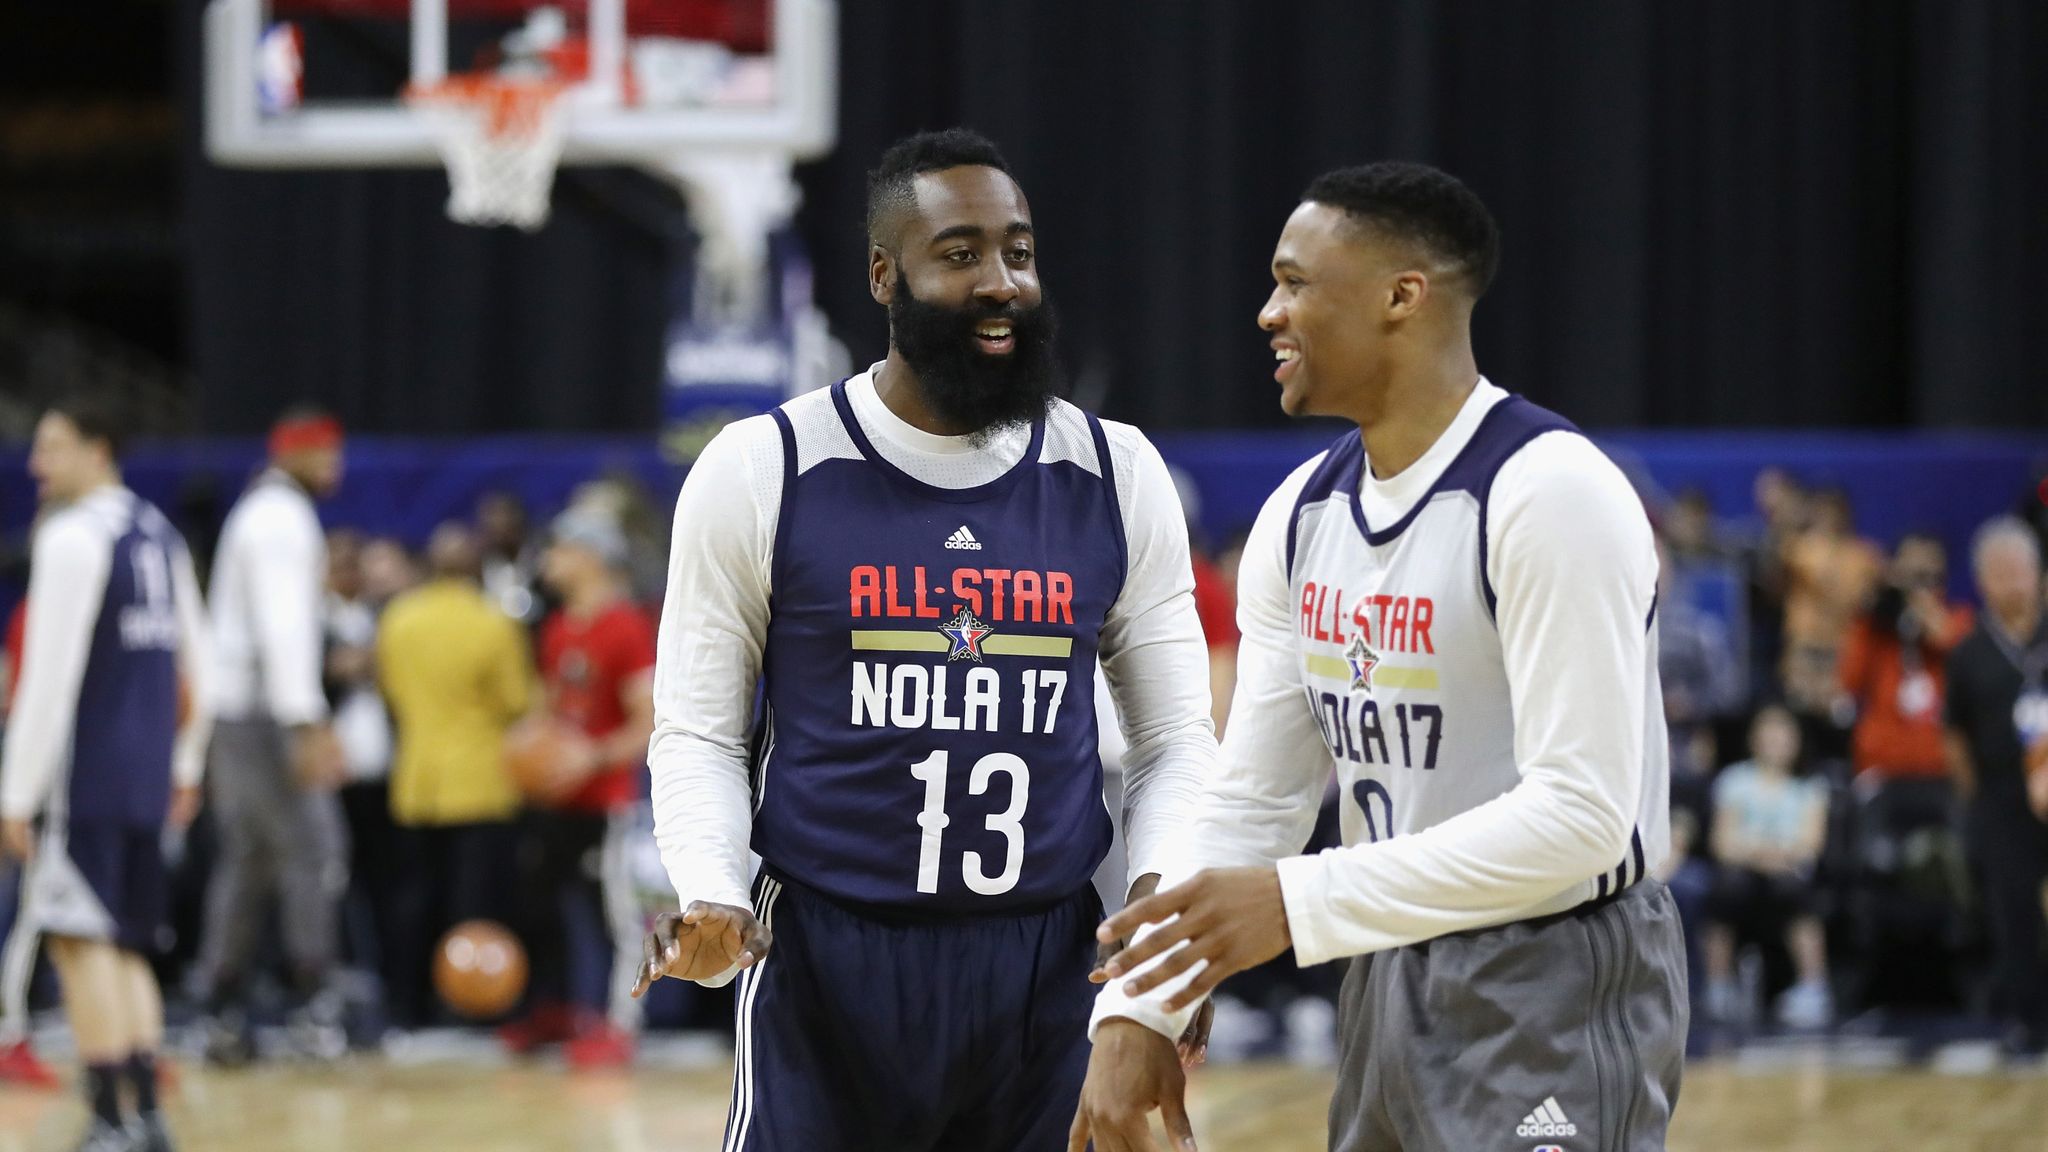 Russell Westbrook doesn't care what anybody says, while James Harden has  created a lane for himself: The two superstars and former OKC teammates  discuss fashion - The SportsRush